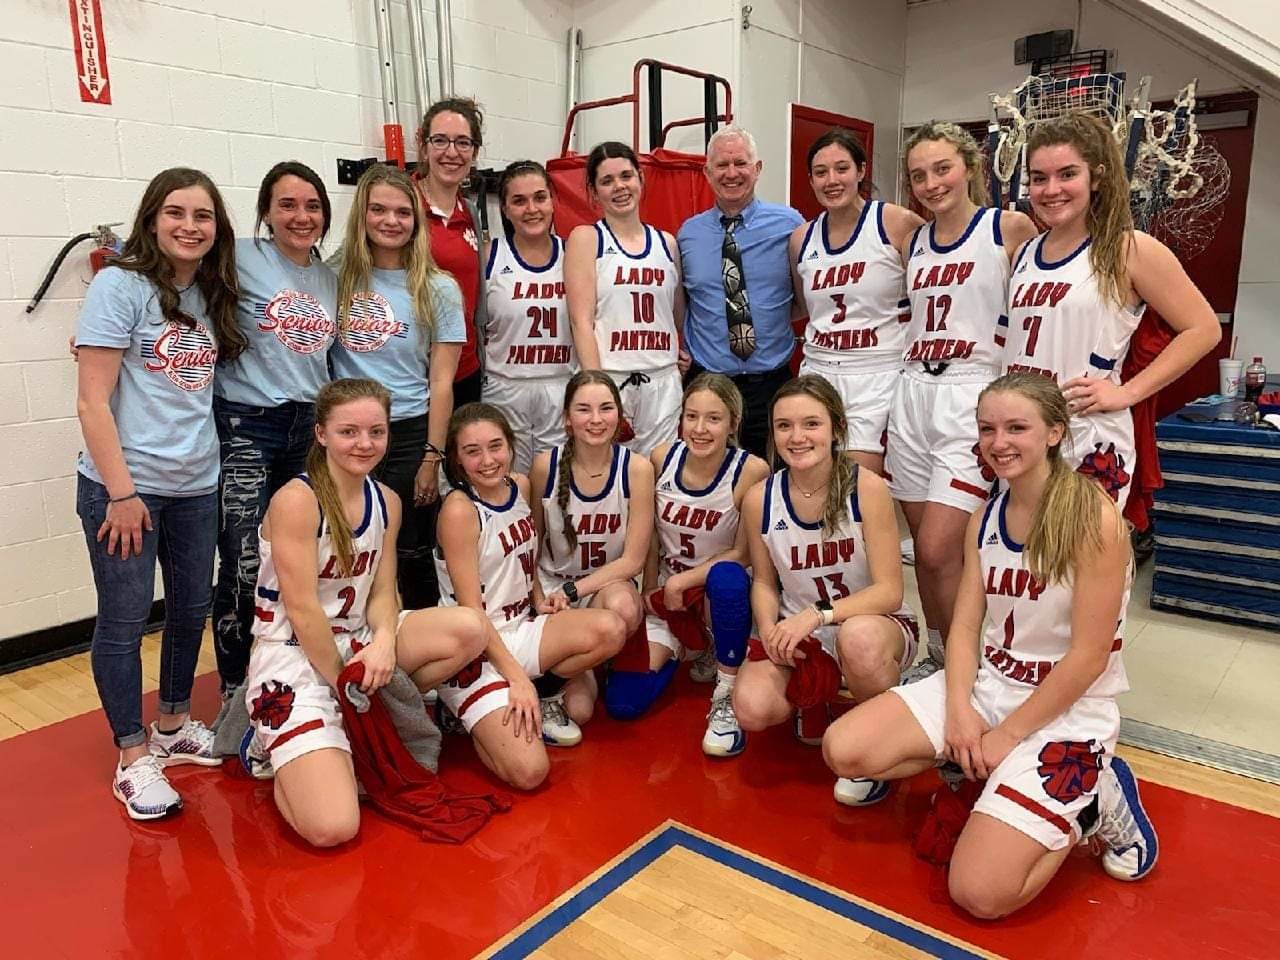 The Alba Golden Lady Panthers are district basketball champs and will take on the Rivercrest Lady Rebels Thursday Feb. 11 at 7:30 p.m. in the bidsitrict playoff at the Sulphur Springs High School gym.